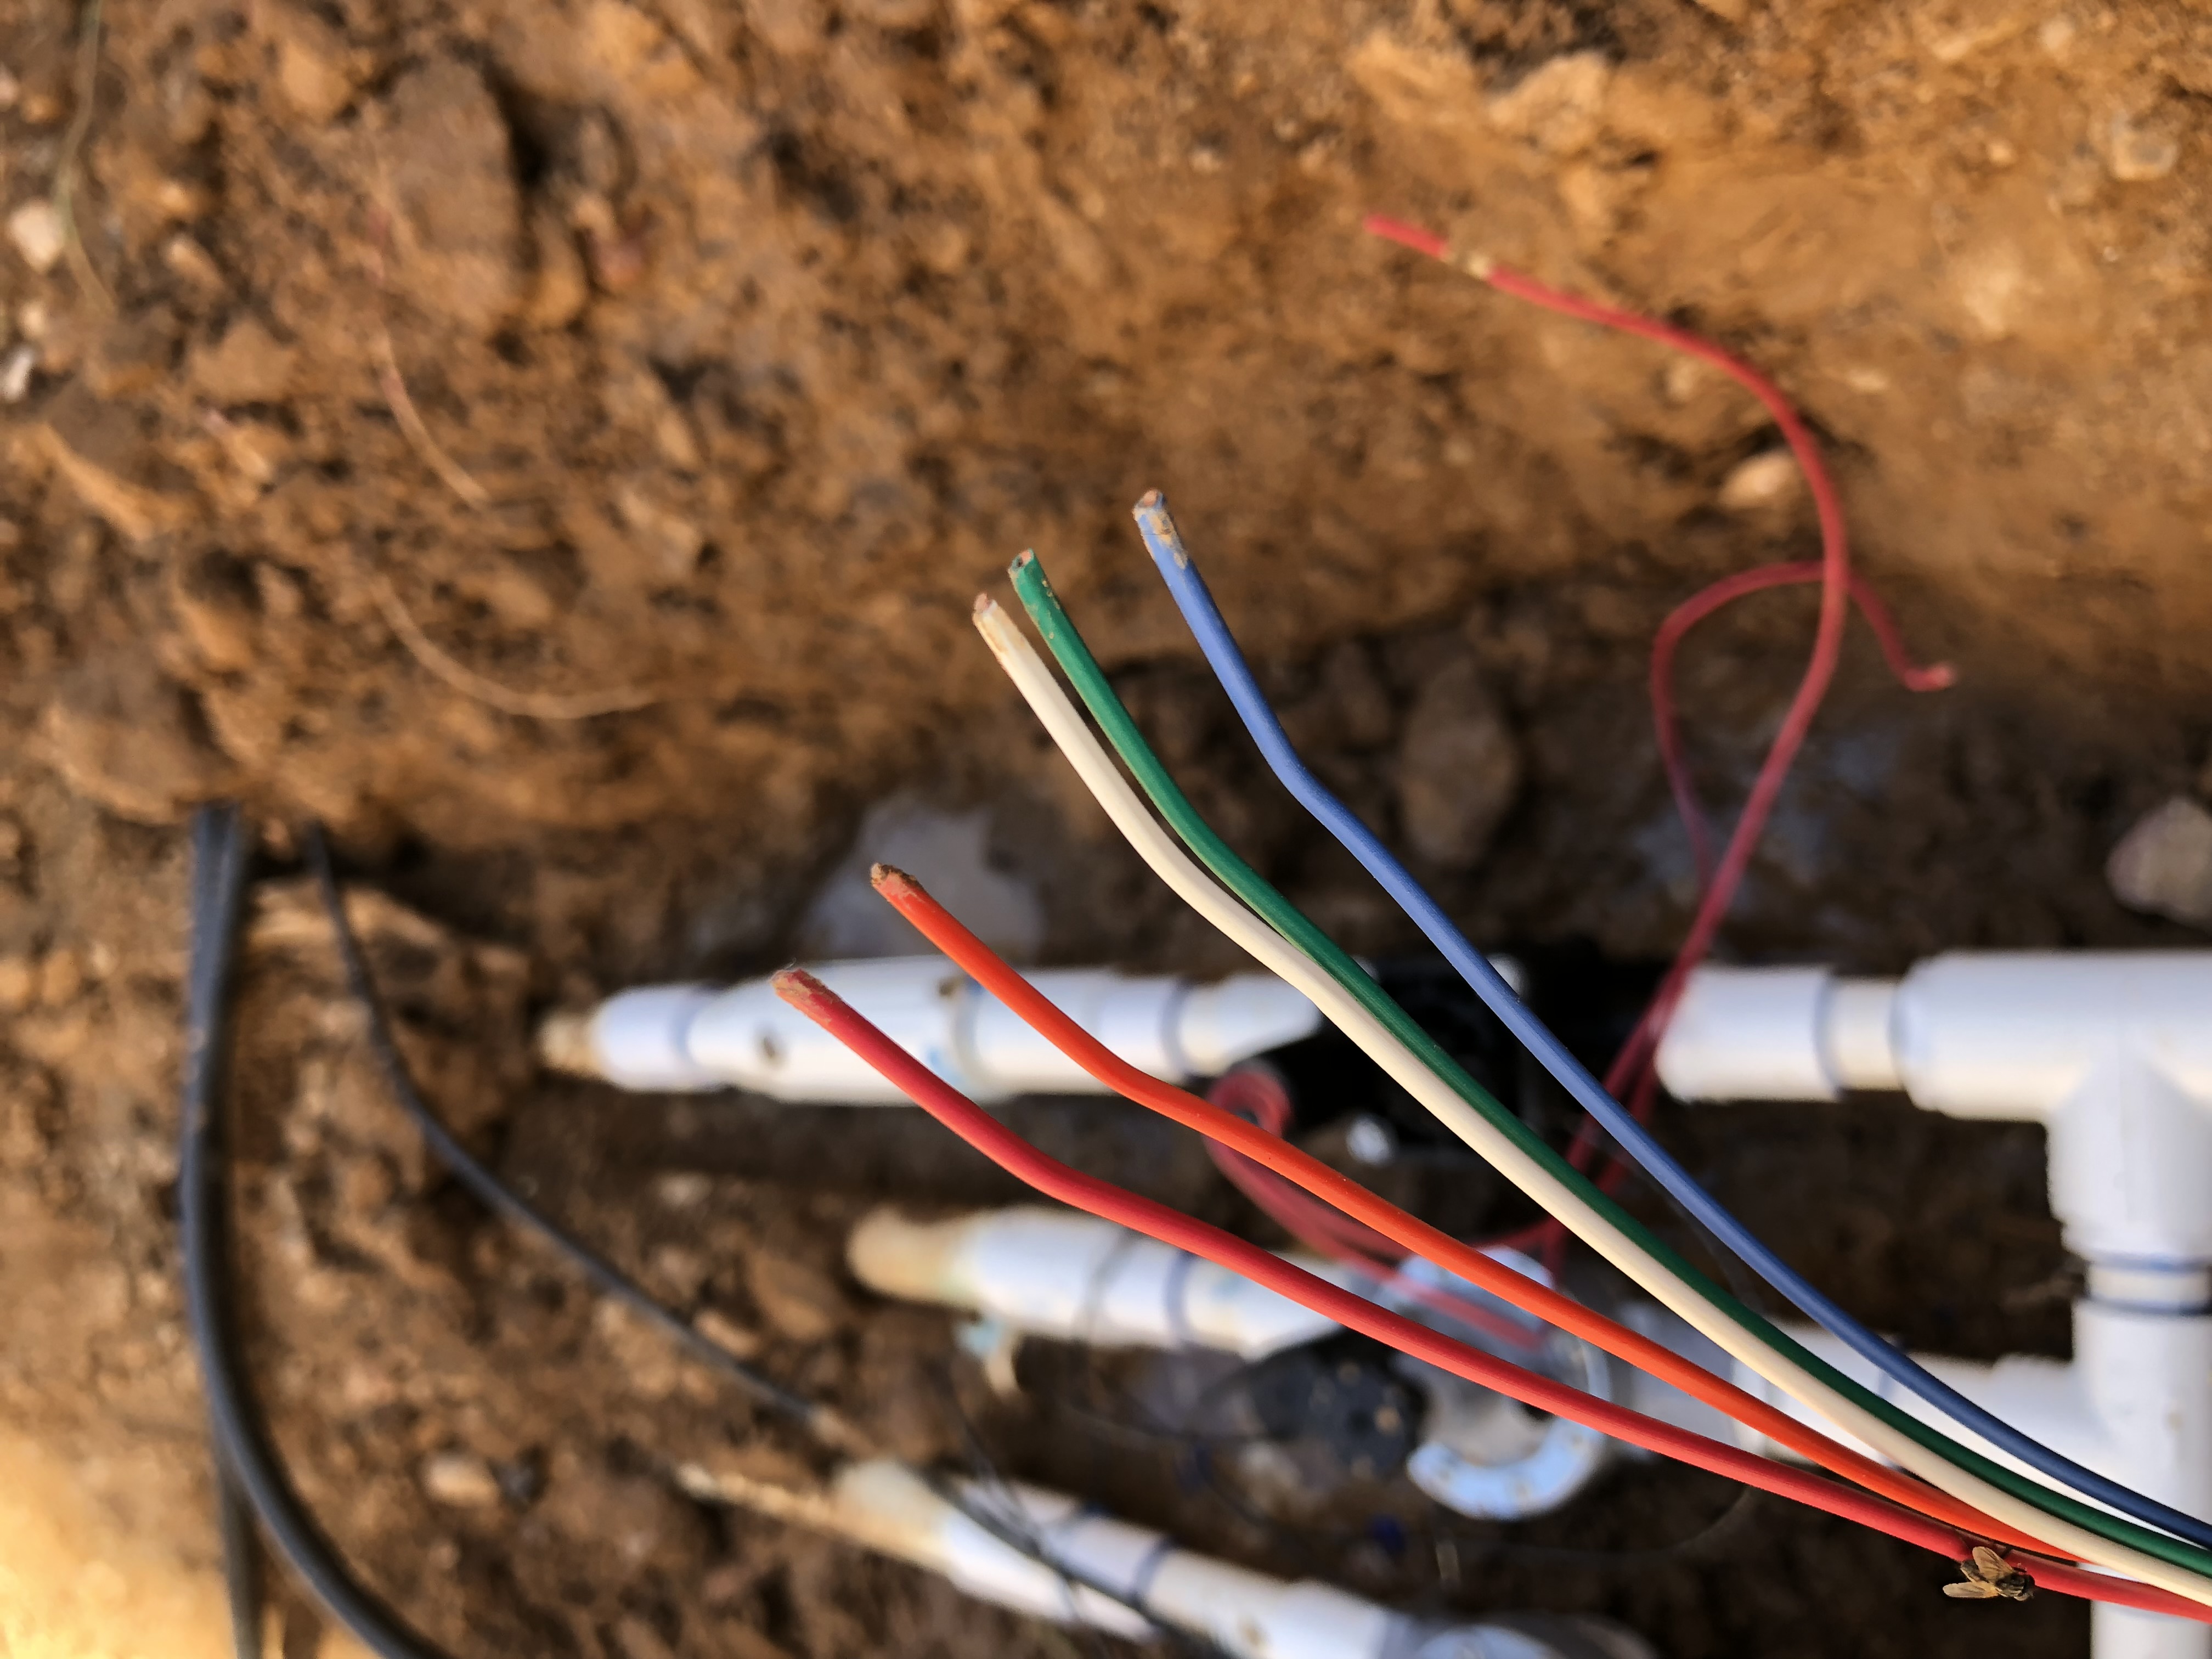 Wiring and electricity for irrigation system.